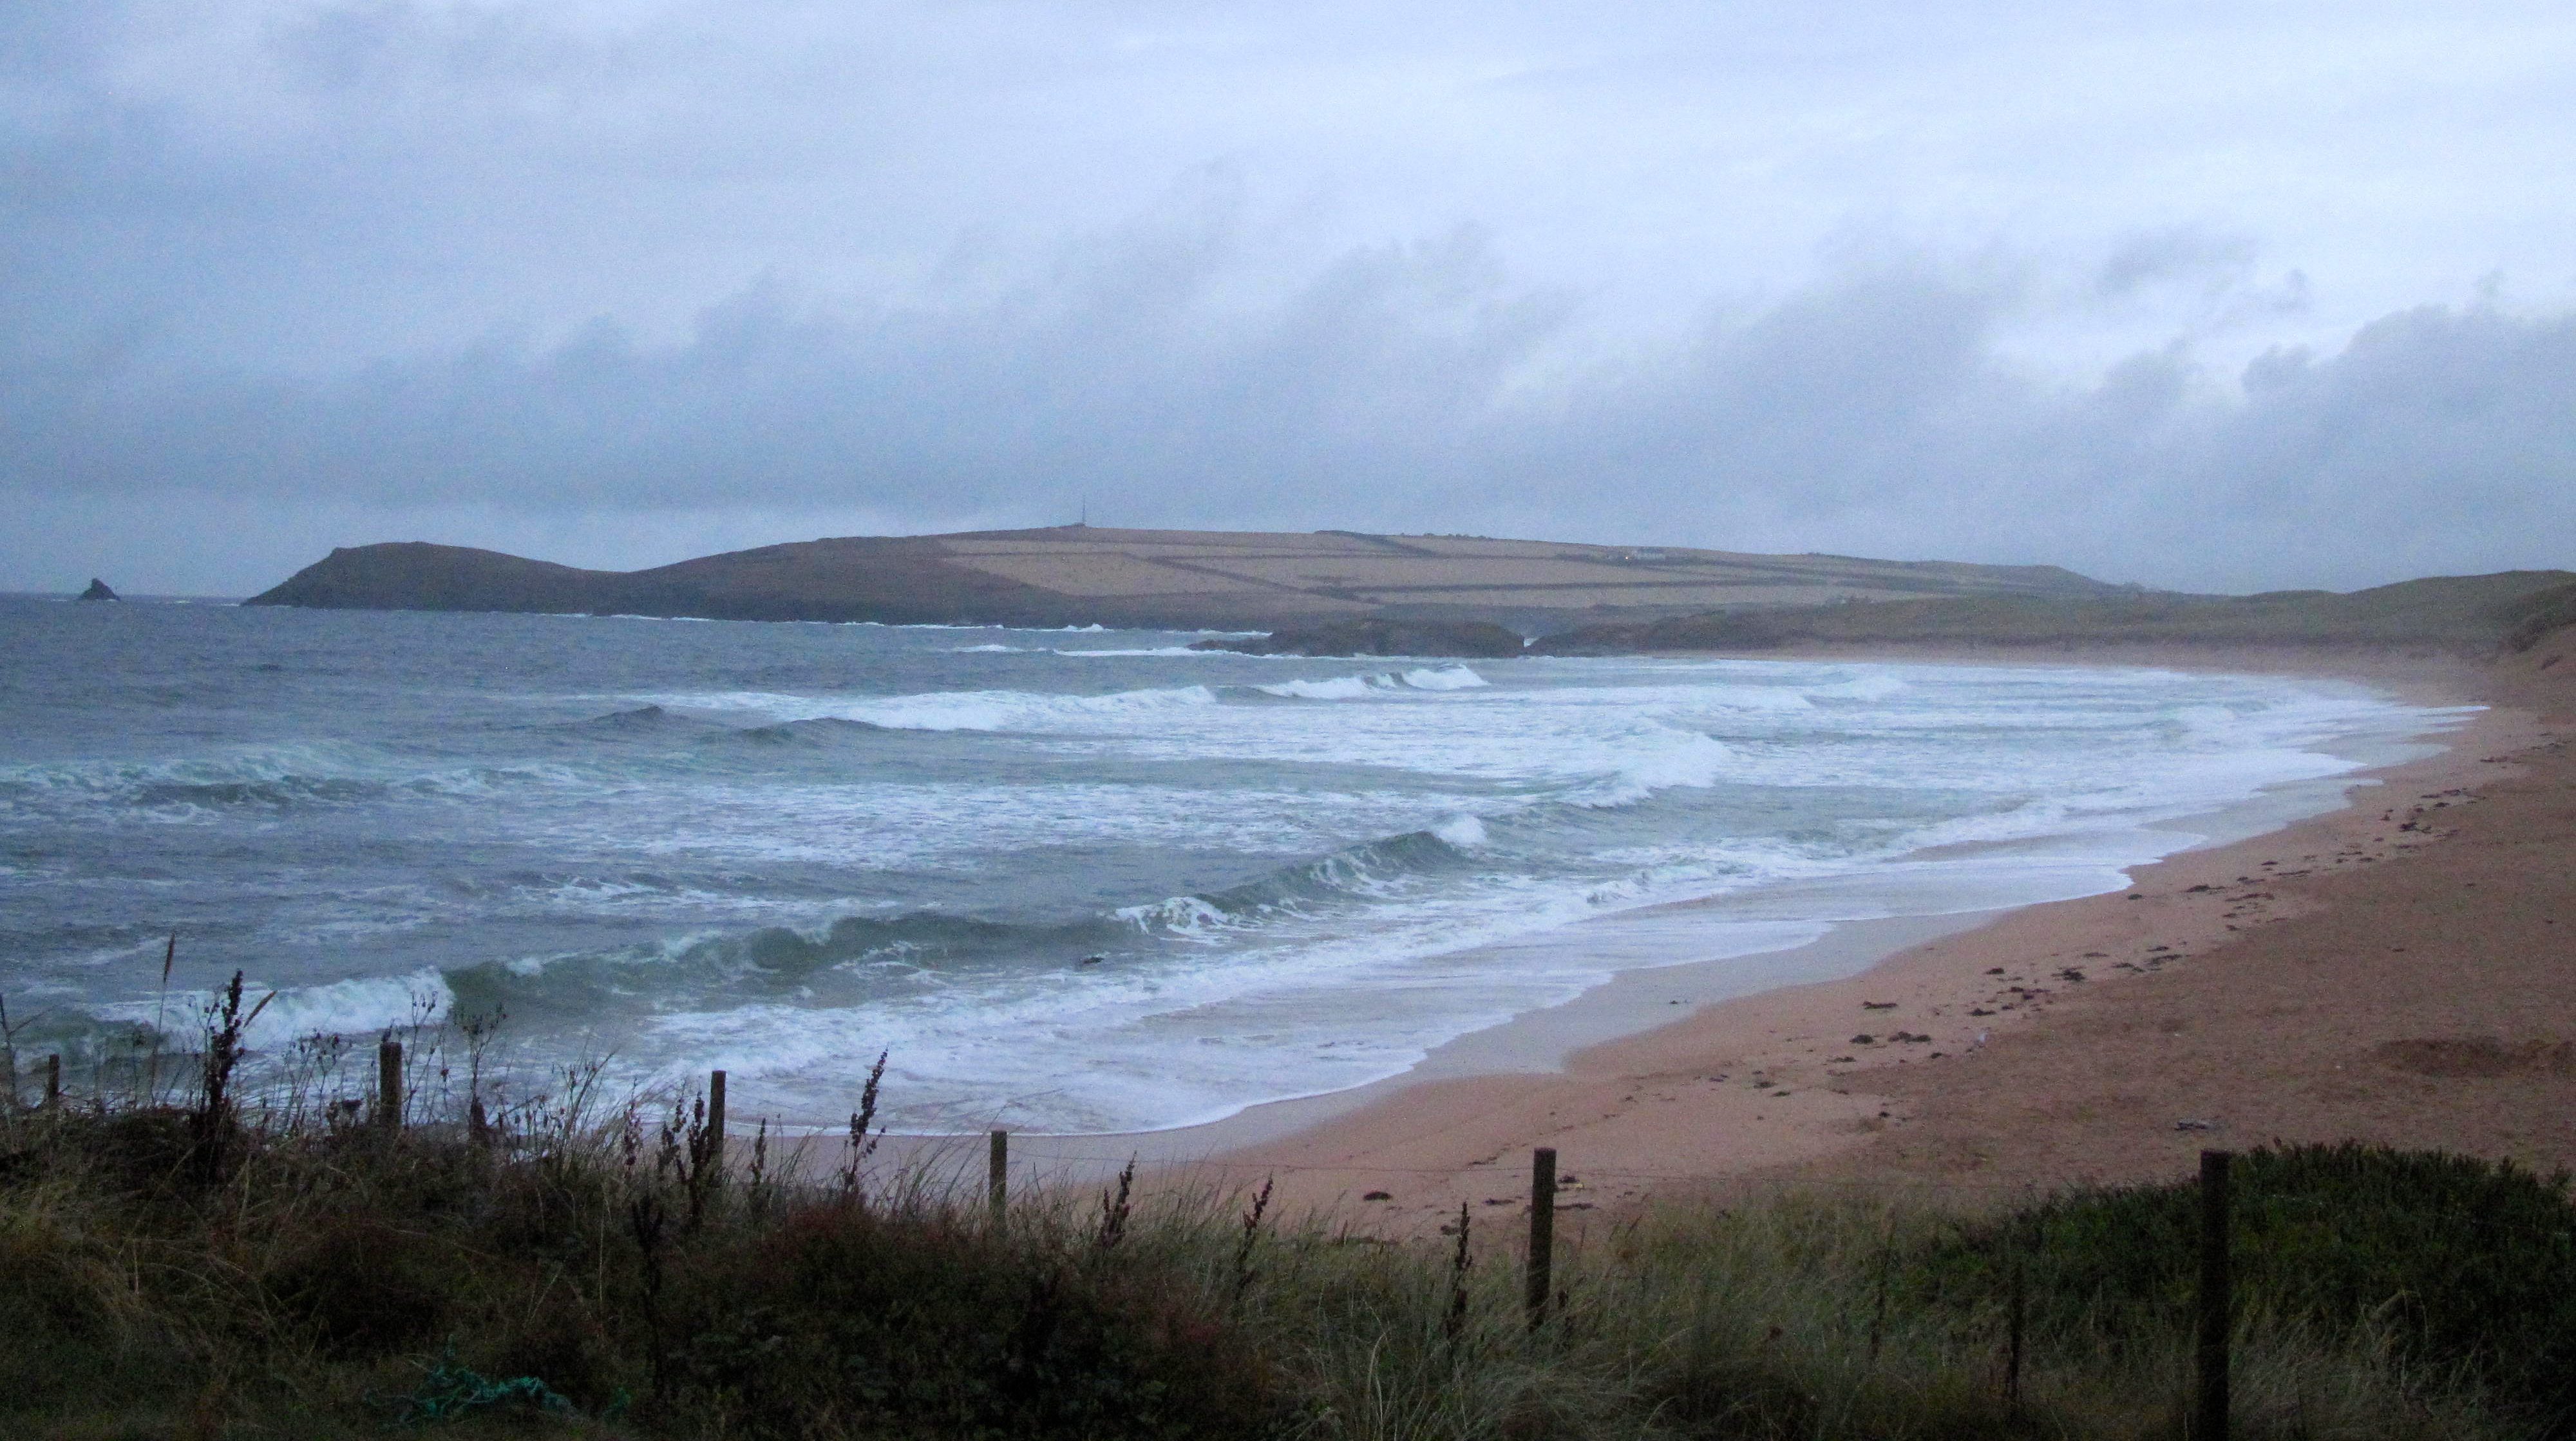 Surf Report for Monday 25th August 2014